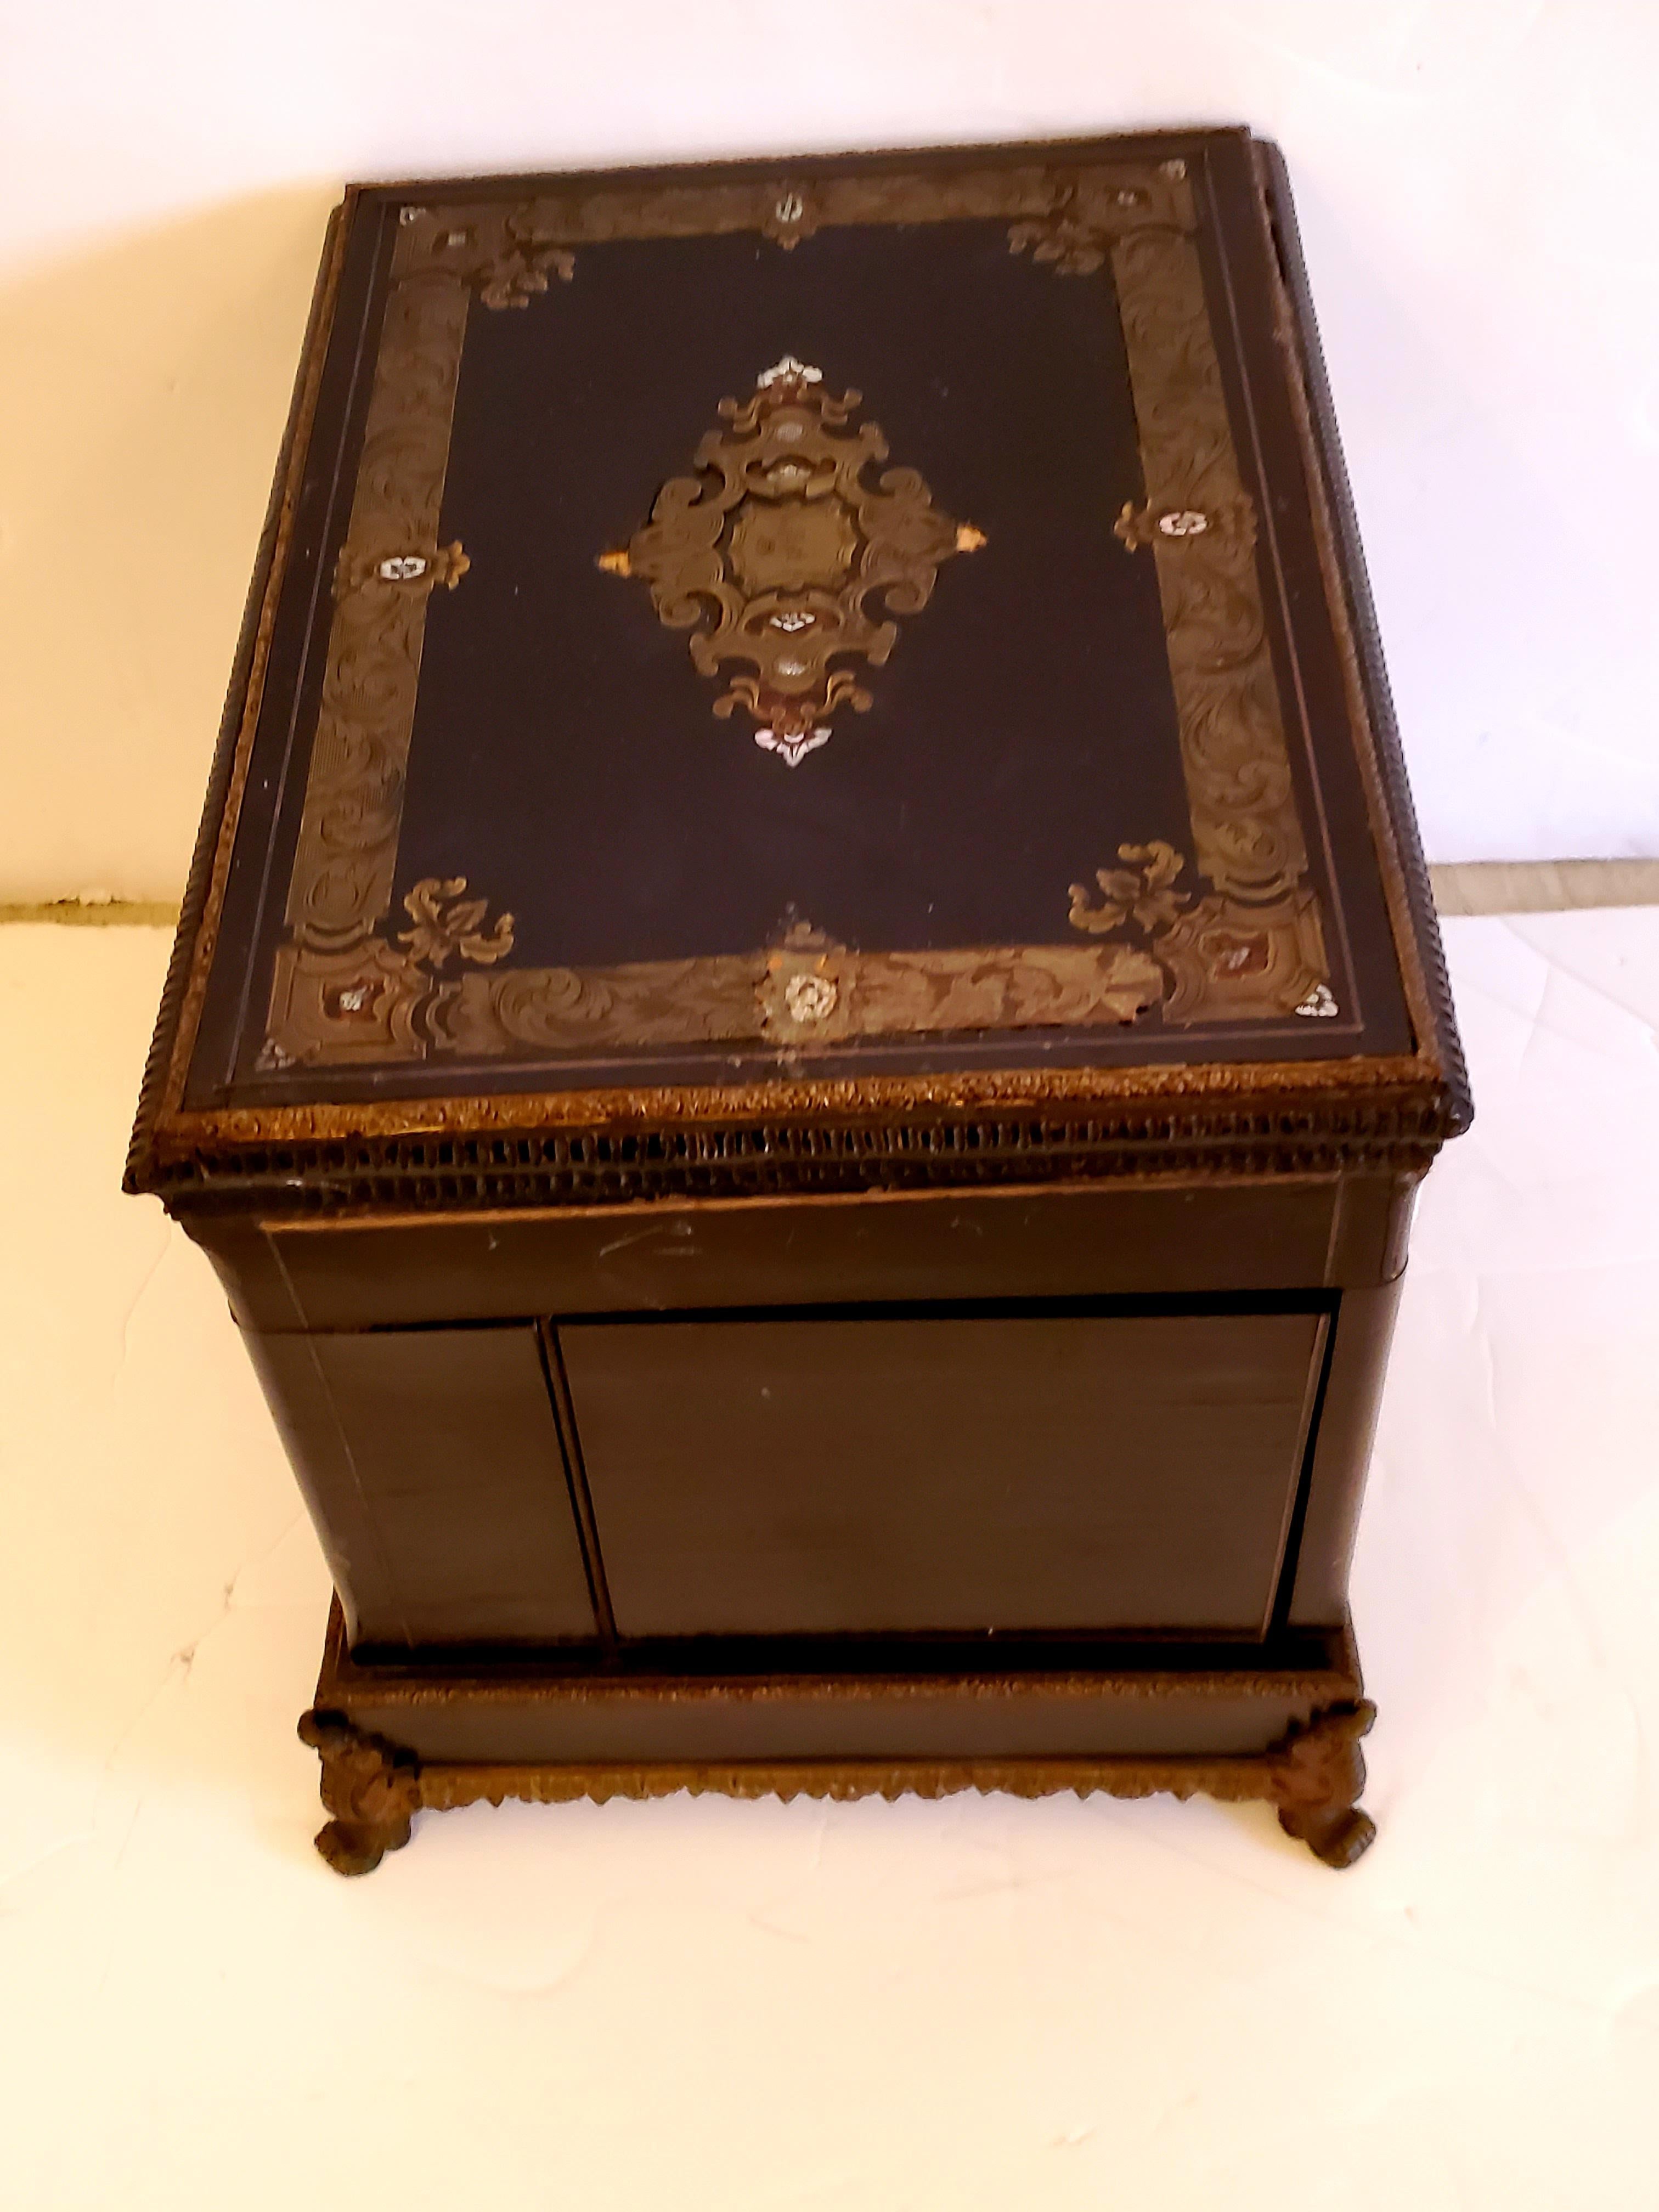 Exceptional painted jewelry box having ornate decoration and ormolu base. Interior has lined compartments.